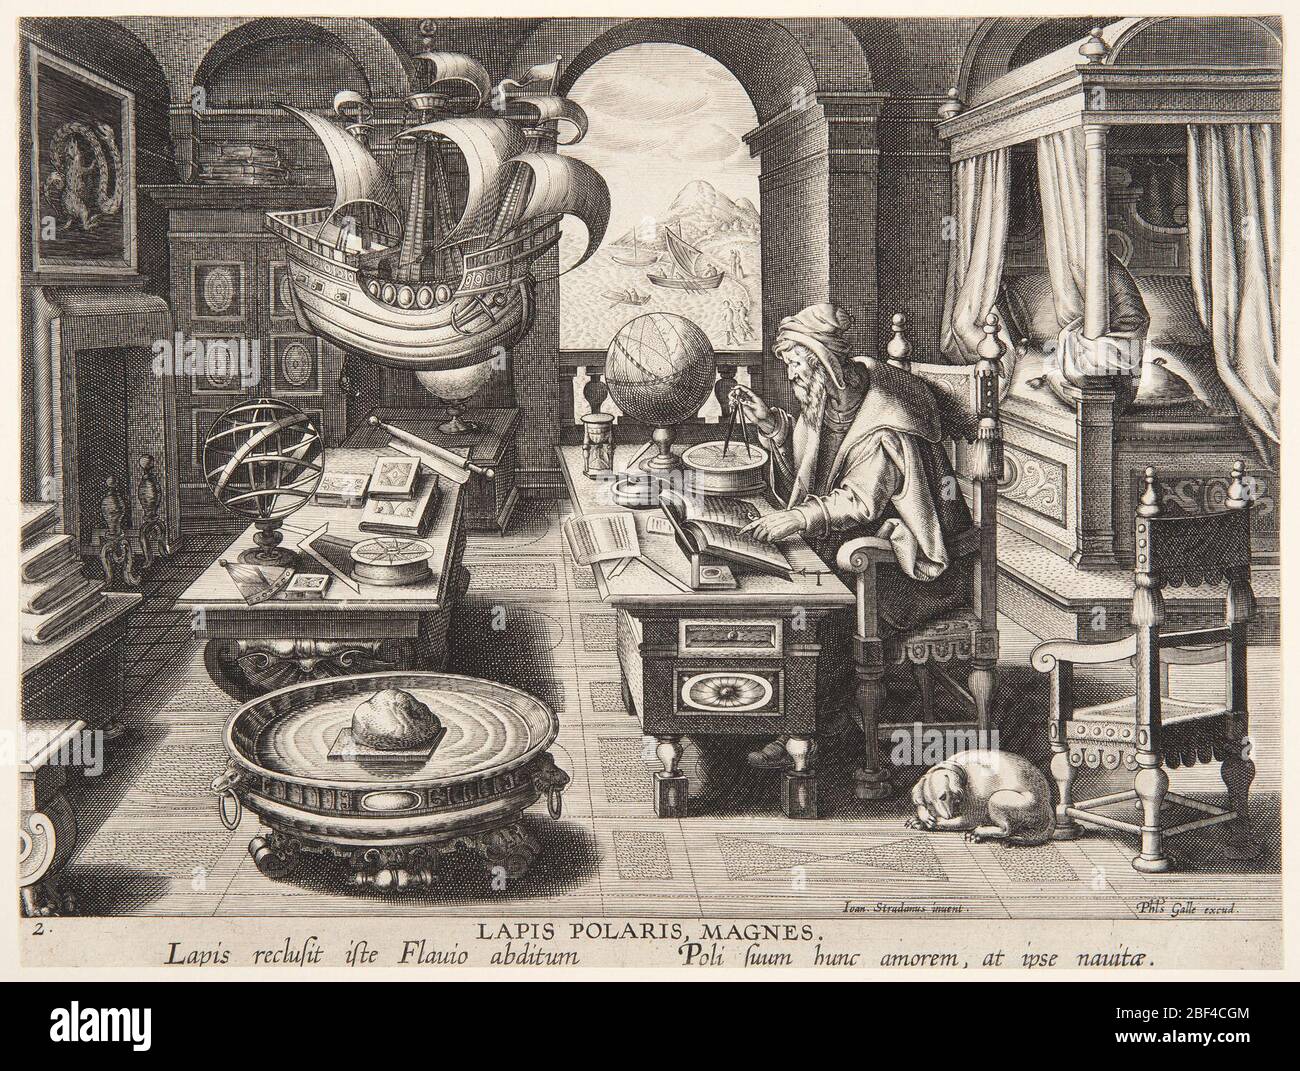 Lapis Polaris Magnes Invention of the Compass plate 2 of the Nova Reperta New Inventions for Modern Times. An old man, identified as the legendary Flavio Amalfitano, seated at his desk using a compass and reading a book; tools, books, and instruments are arranged around the richly furnished room; a dog is at his feet. Stock Photo